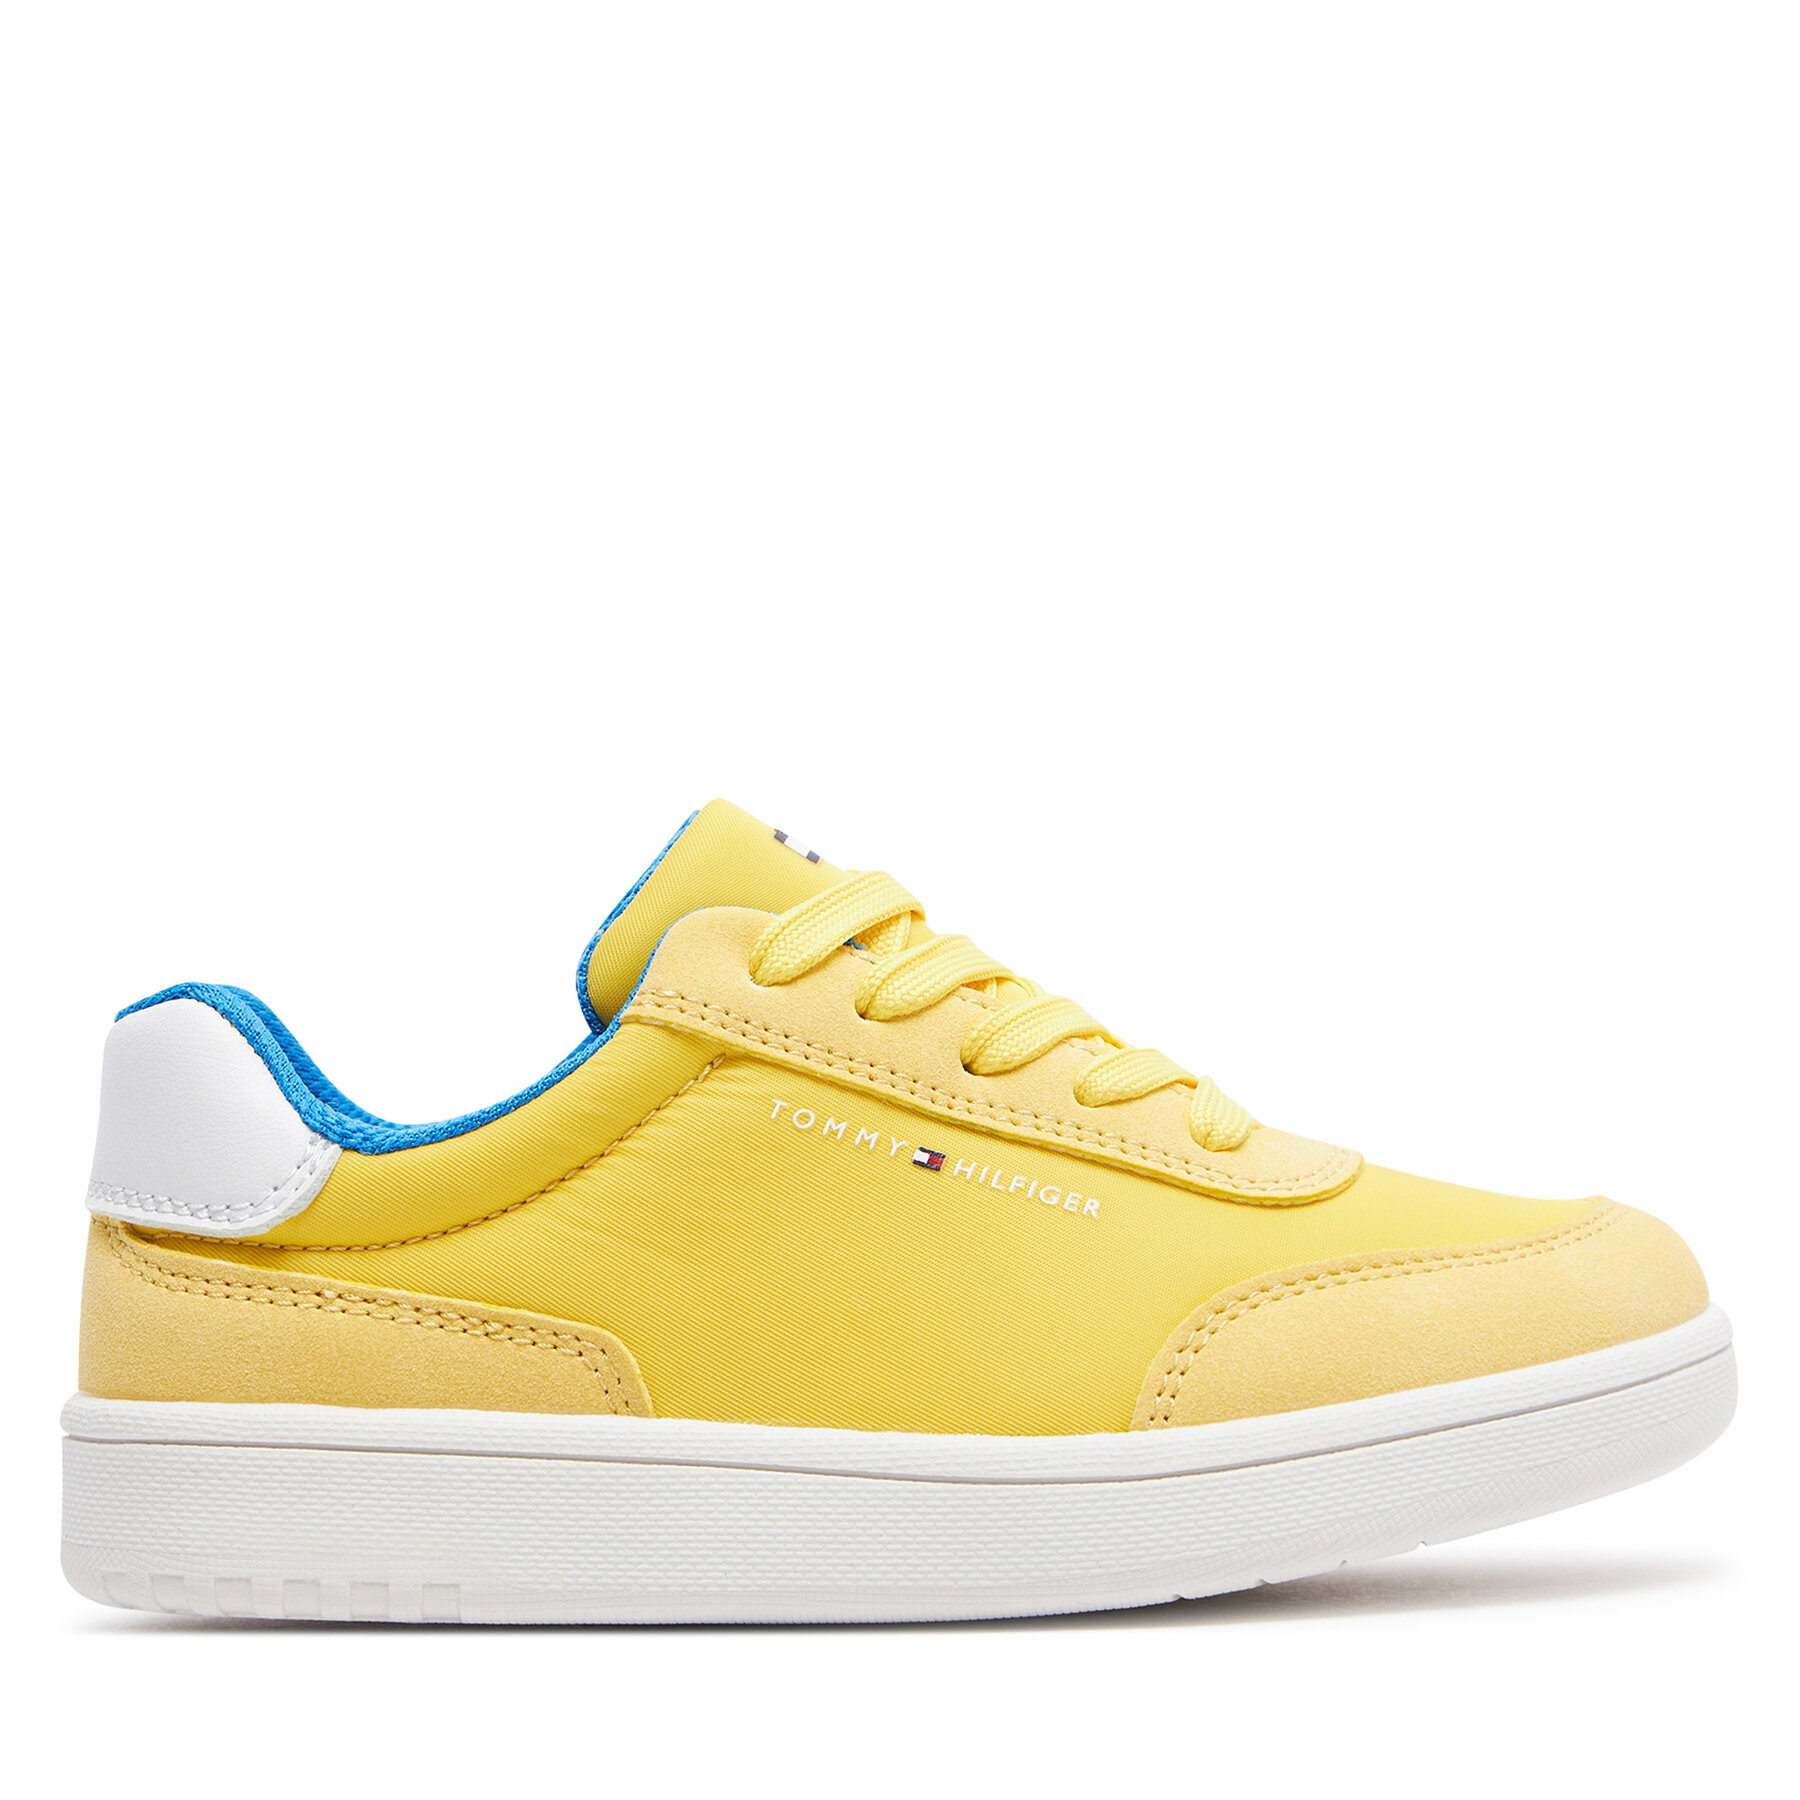 Sneakers Tommy Hilfiger Low Cut Lace-Up Sneaker T3X9-33351-1694 M Yellow 200 von Tommy Hilfiger